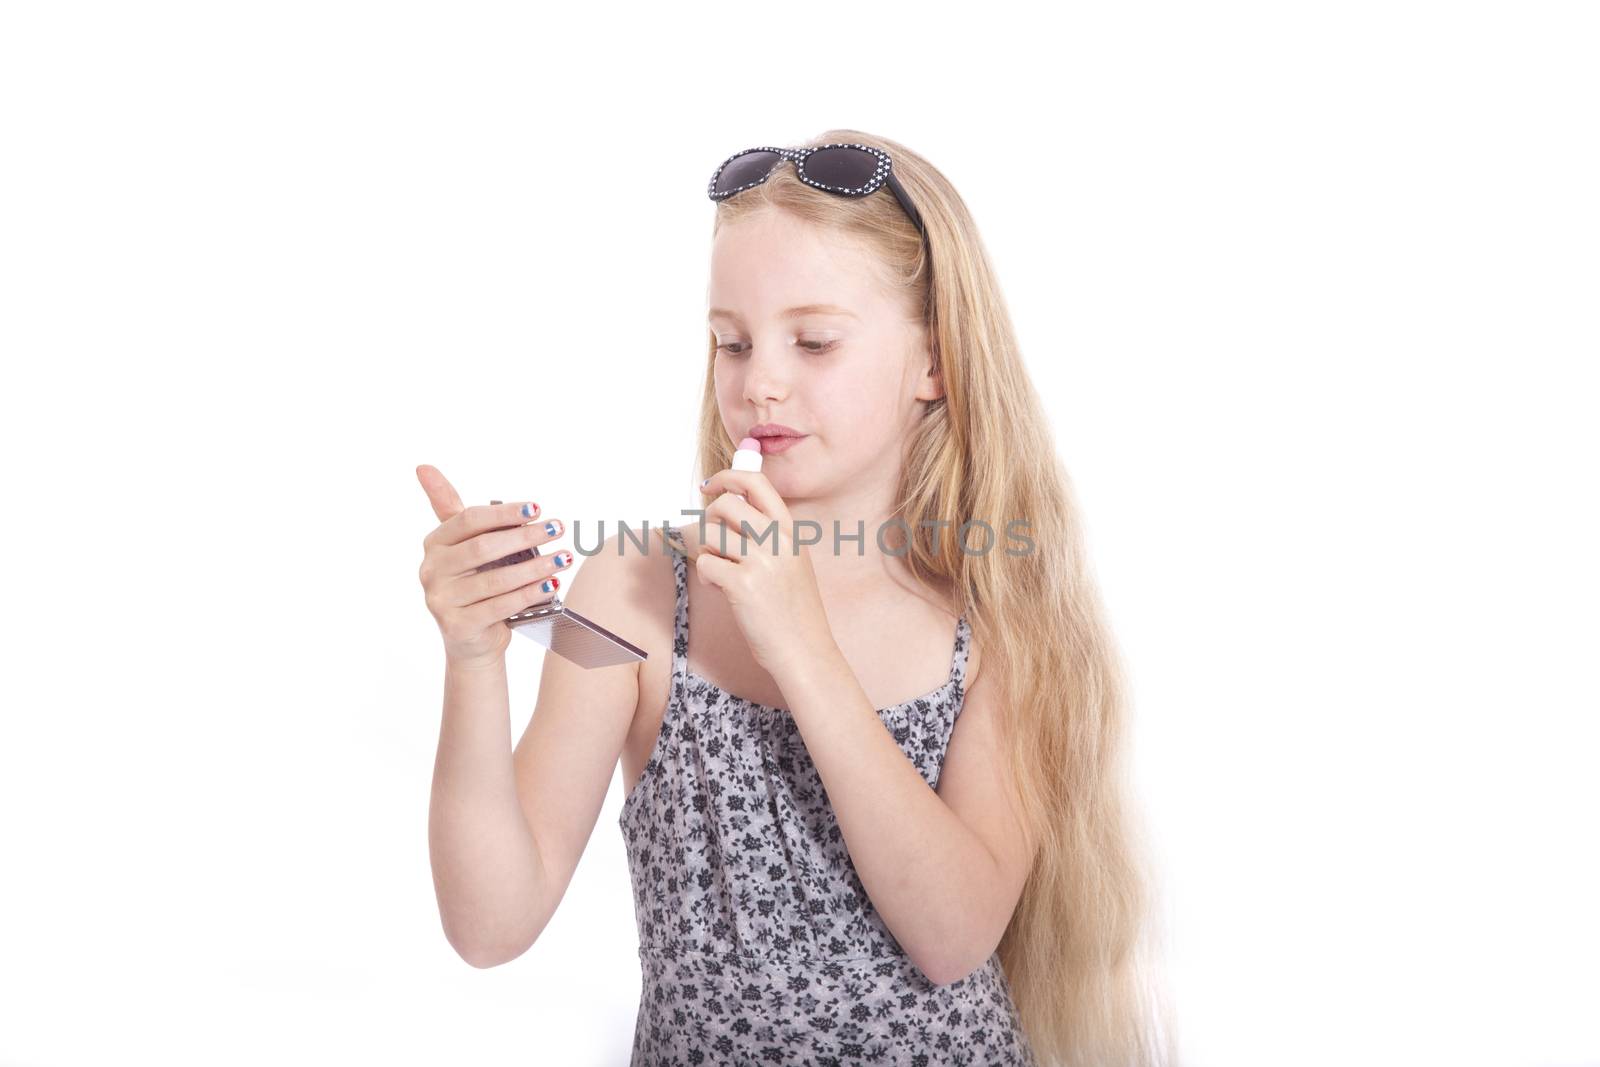 young blond girl applying lipstick in studio against white background